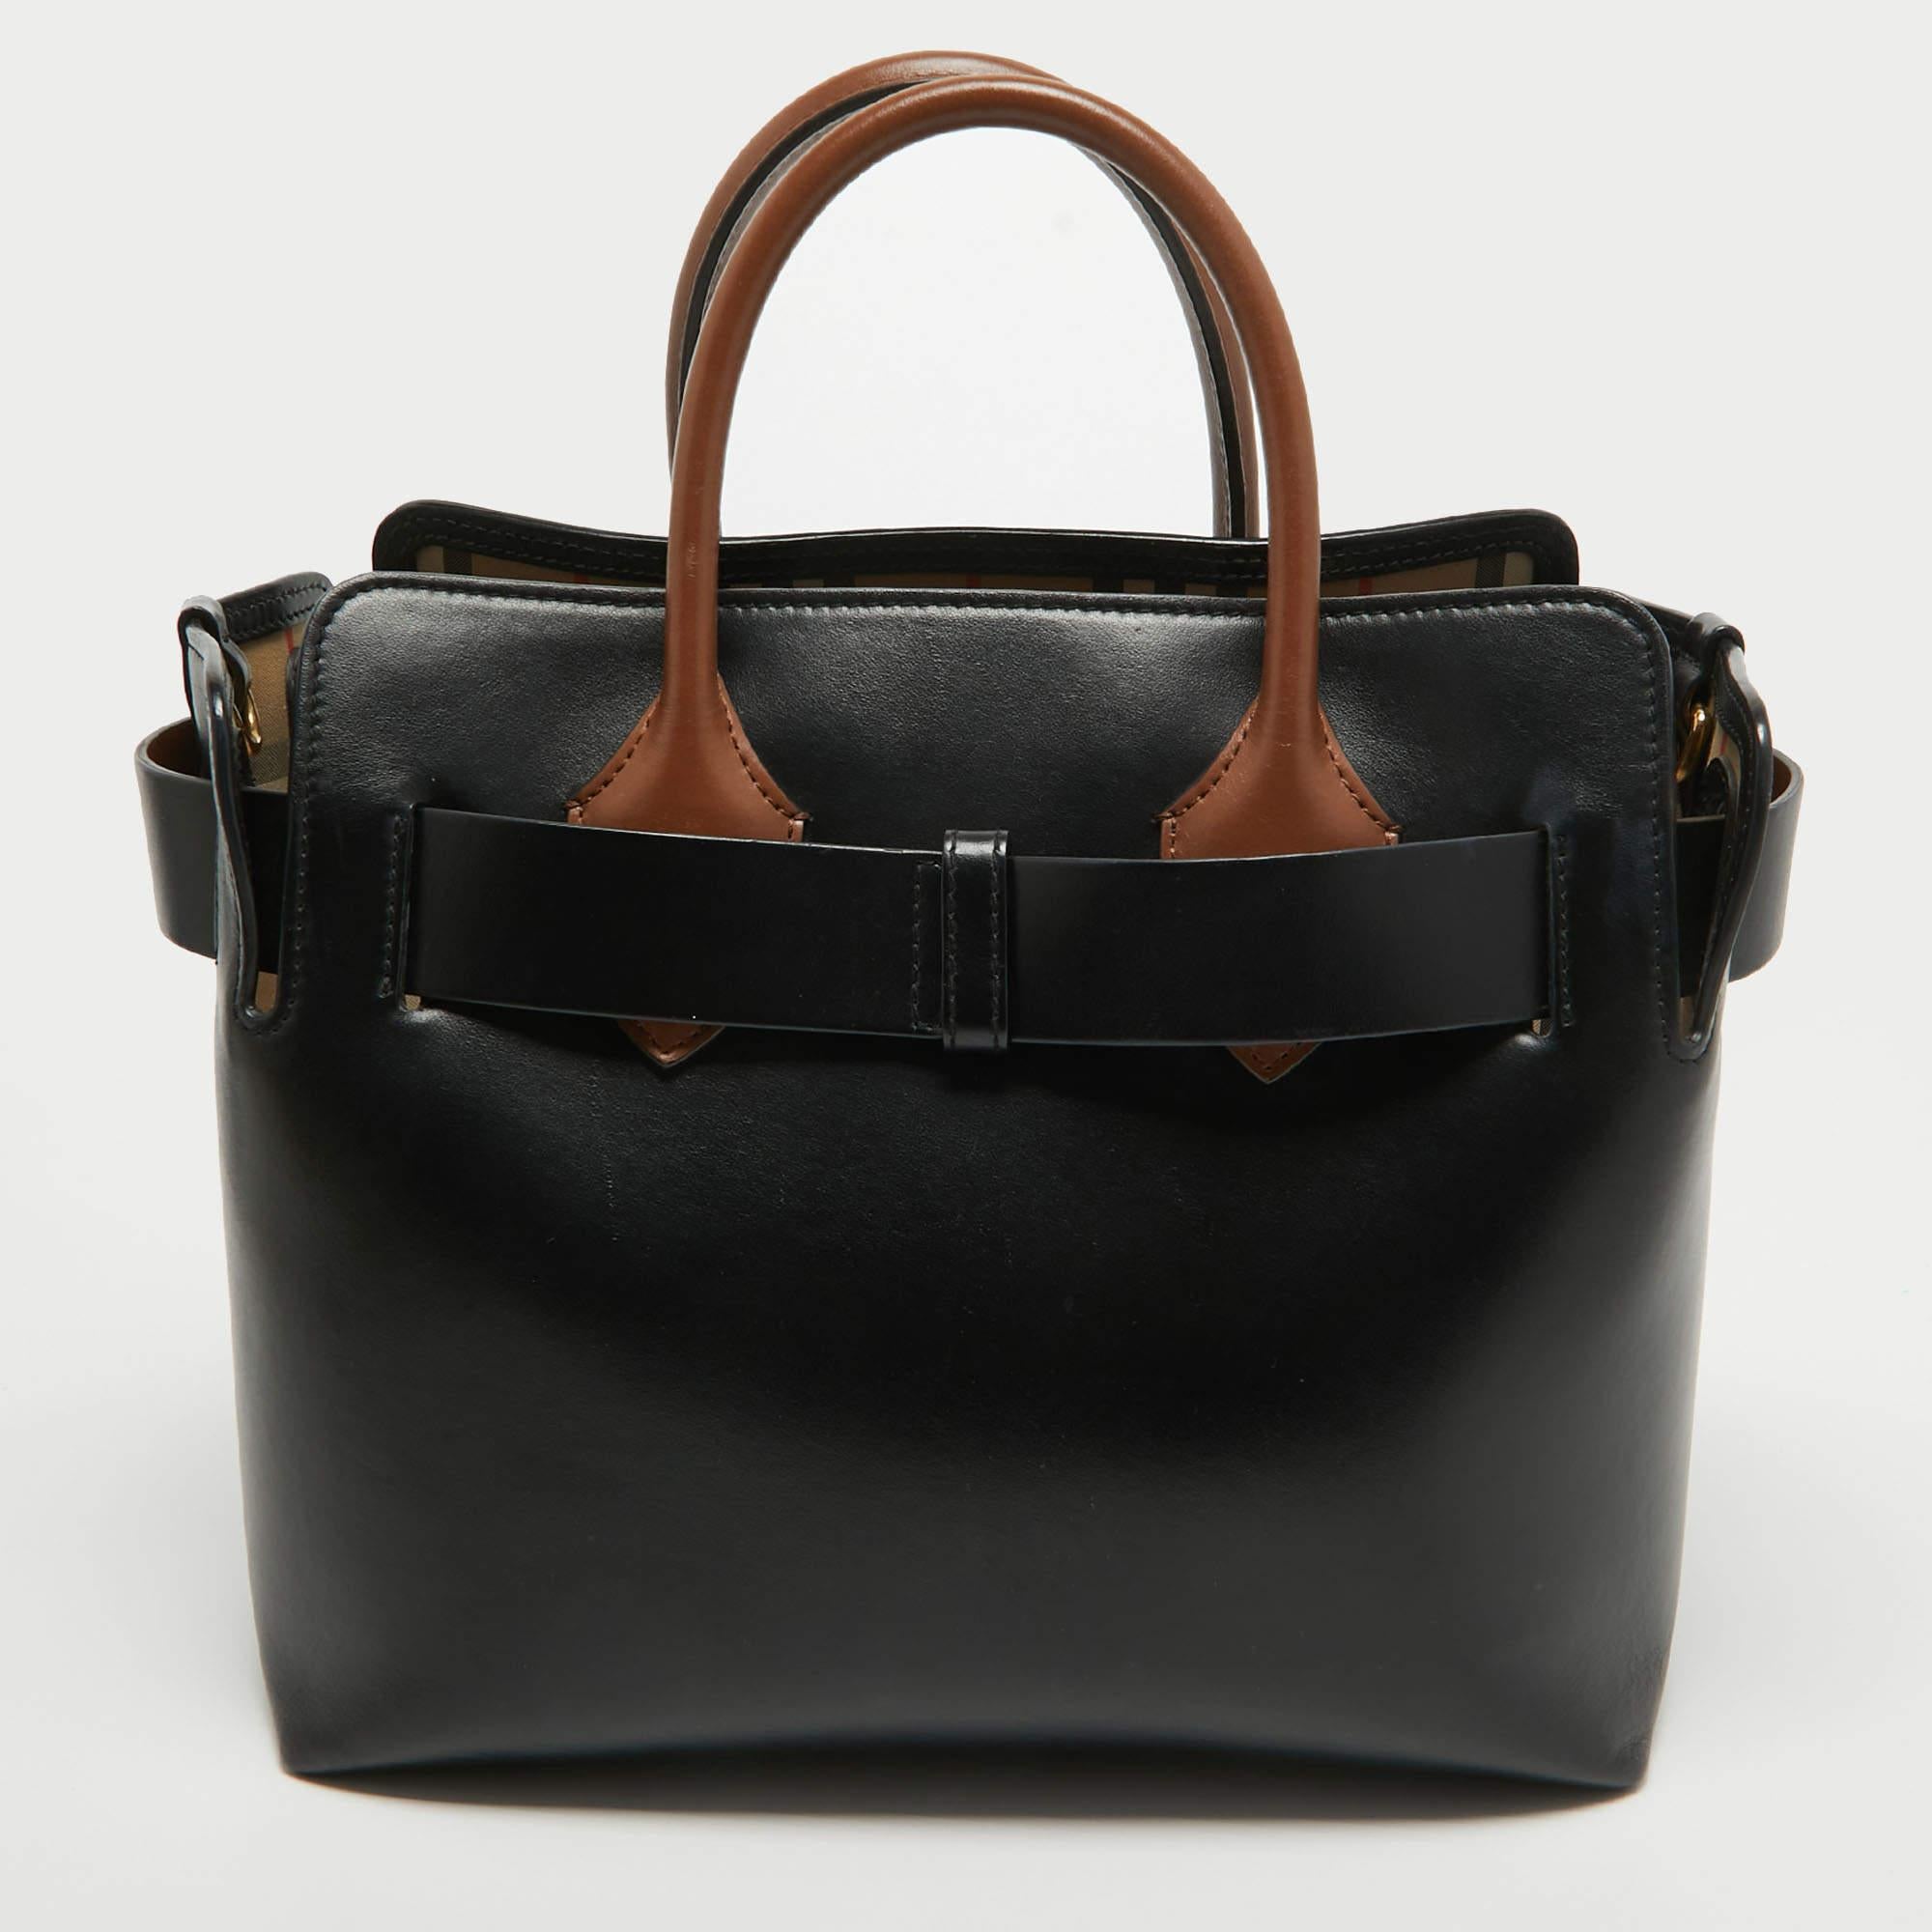 This Burberry Marais Belt tote for women is super classy and functional, perfect for everyday use. We like the notable details and its high-quality finish.

Includes: Original Dustbag, Detachable Strap

